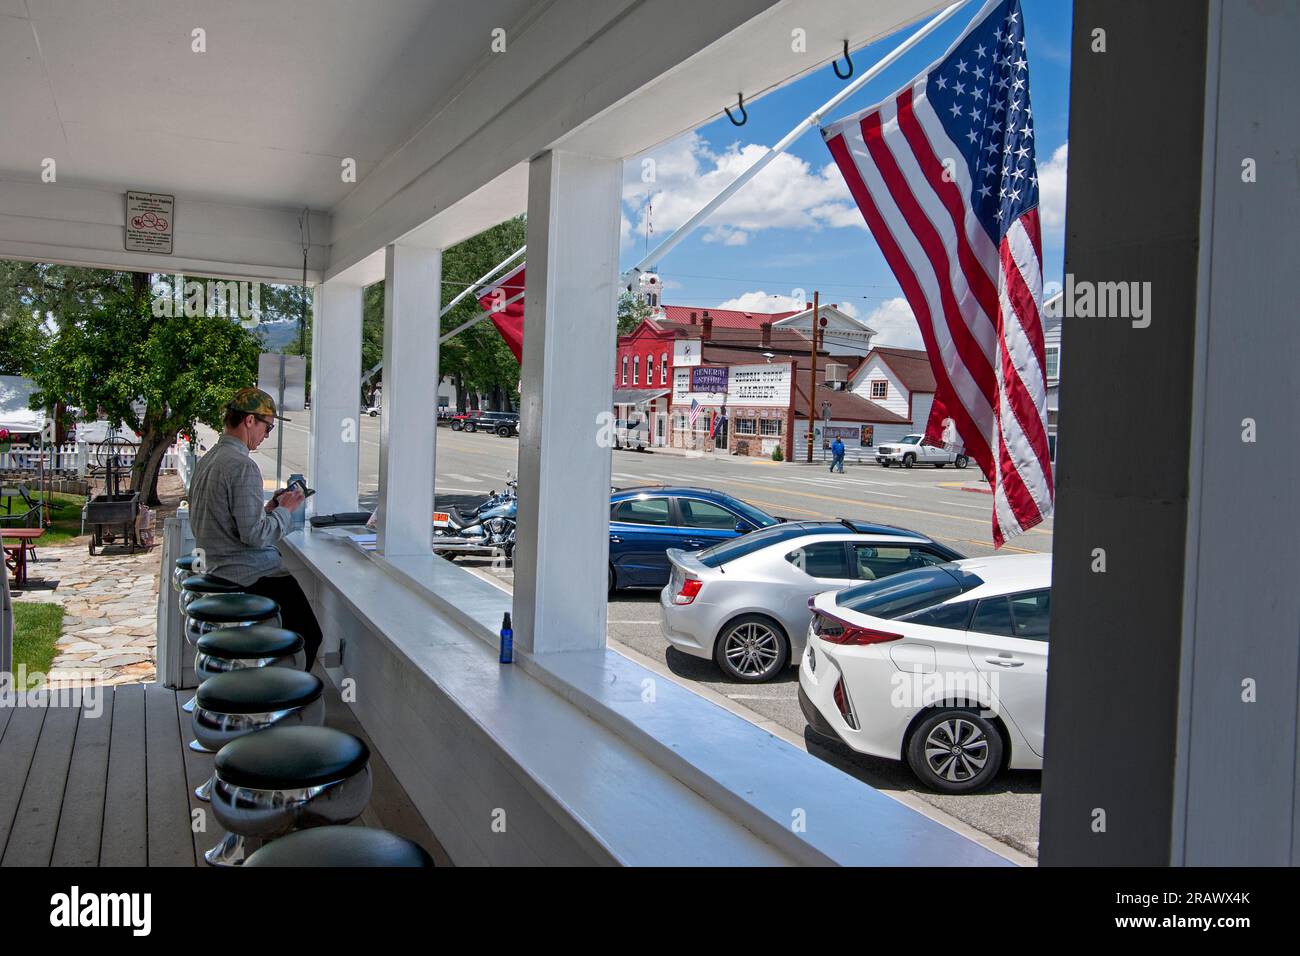 A man sits at an outdoor counter at the historic Bridgeport Inn overlooking the Main Street of small-town Bridgeport, California Stock Photo